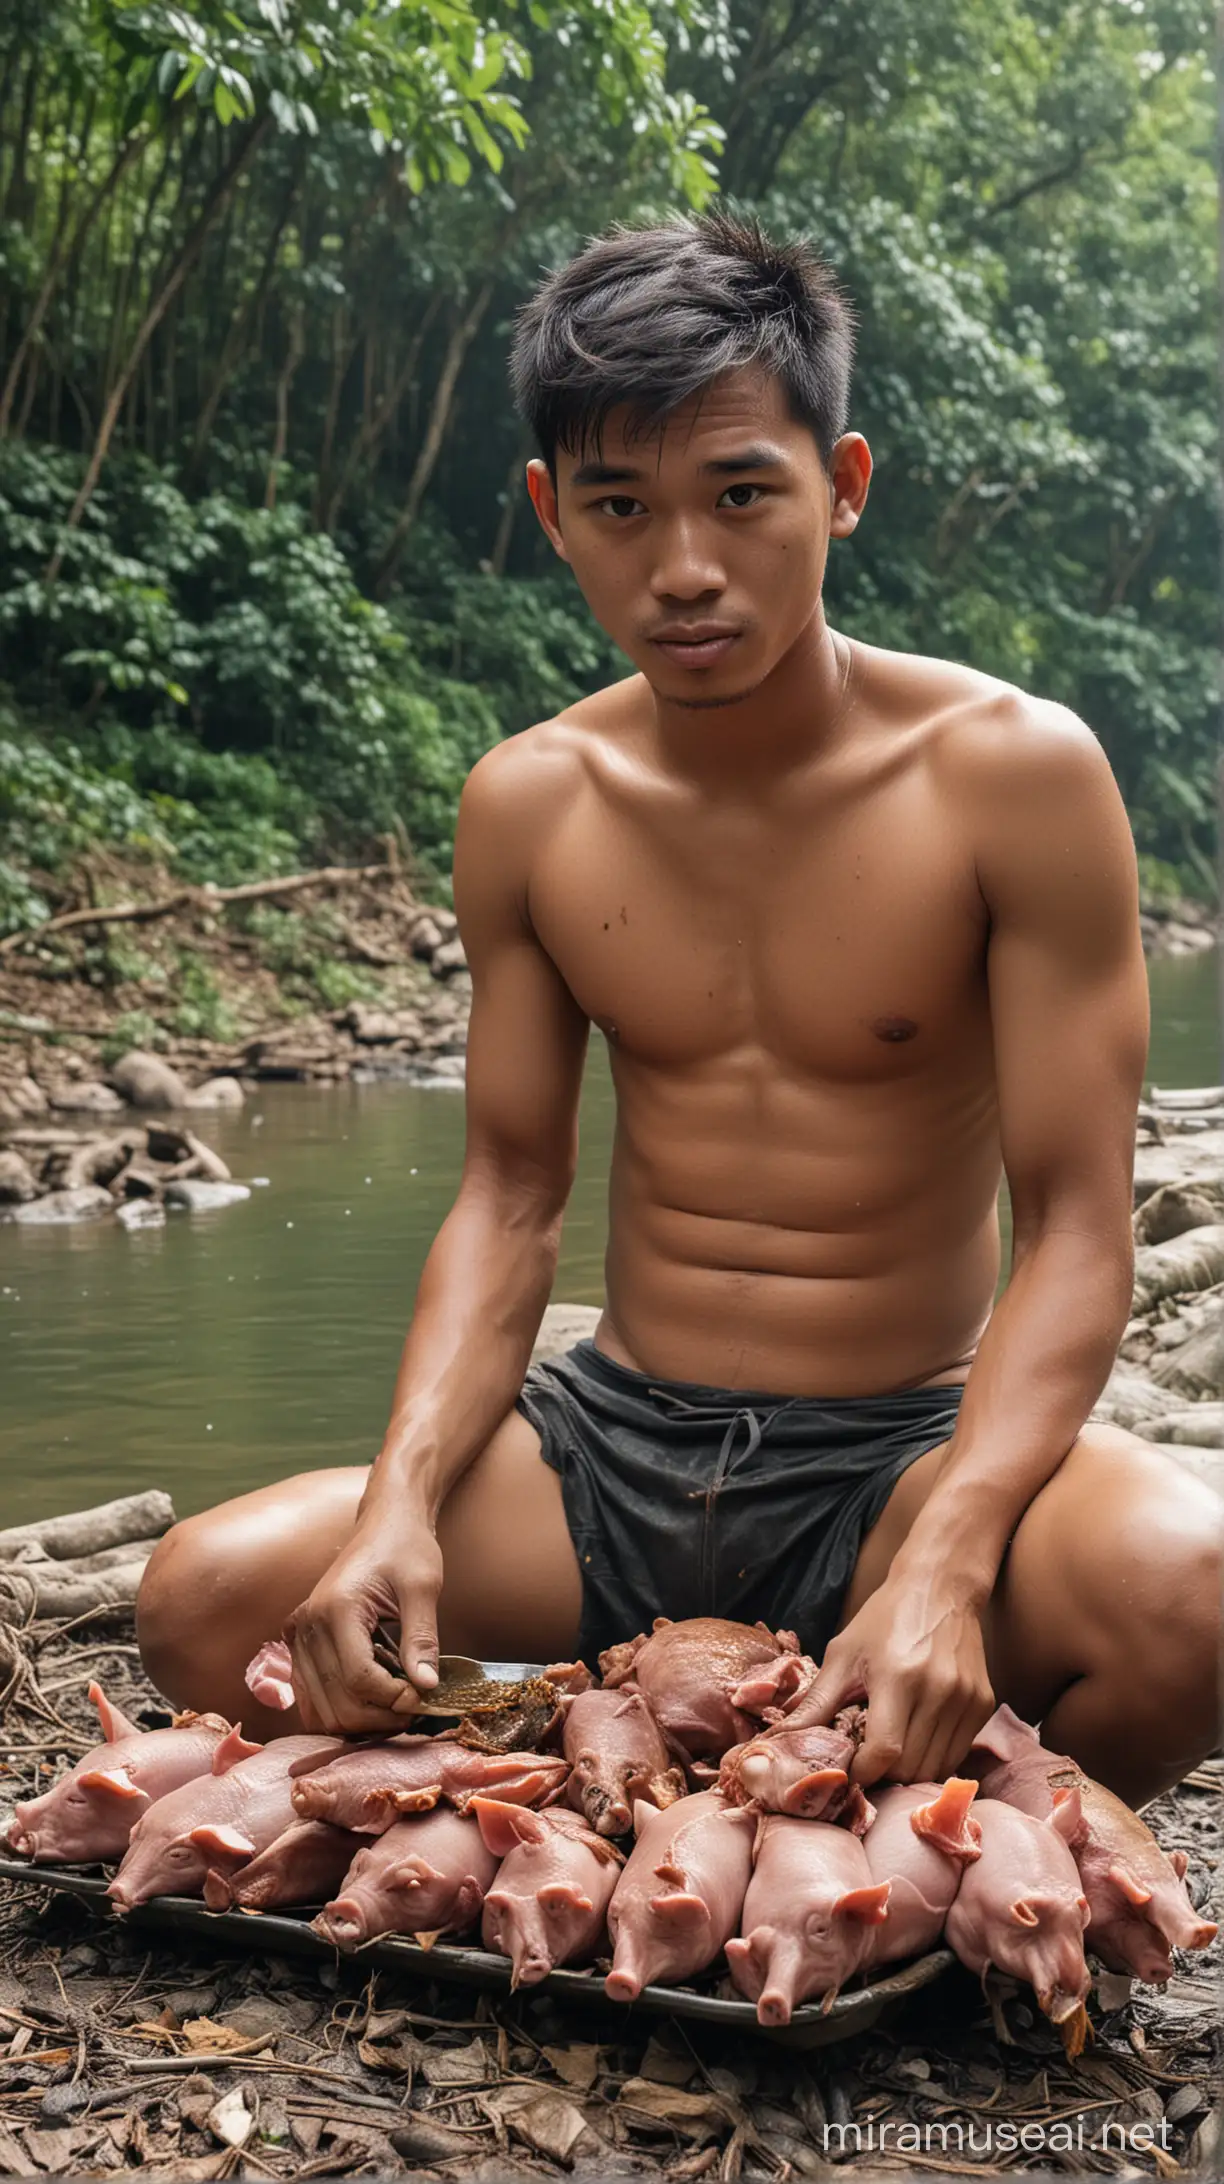 Indonesian Man Eating Roast Pig by River in Forest